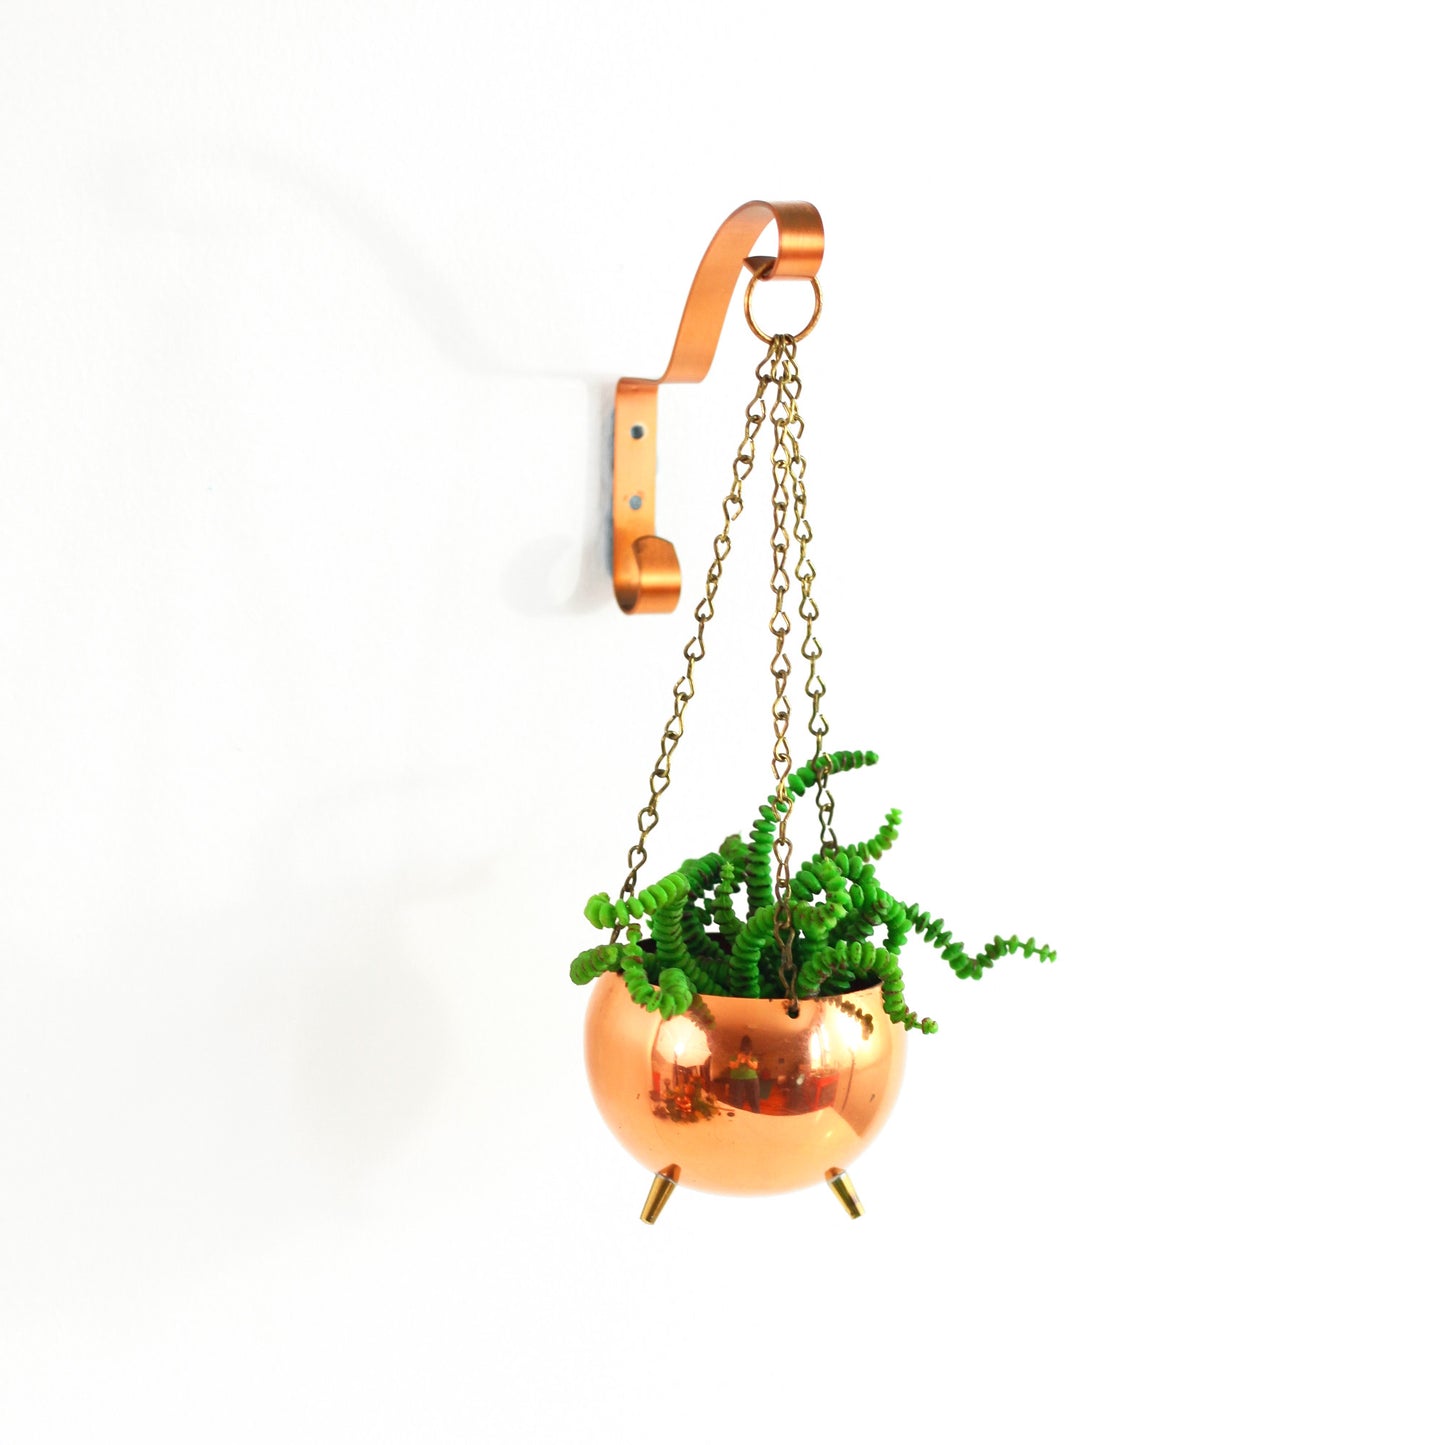 SOLD - Vintage Hanging Footed Copper Planter by Coppercraft Guild